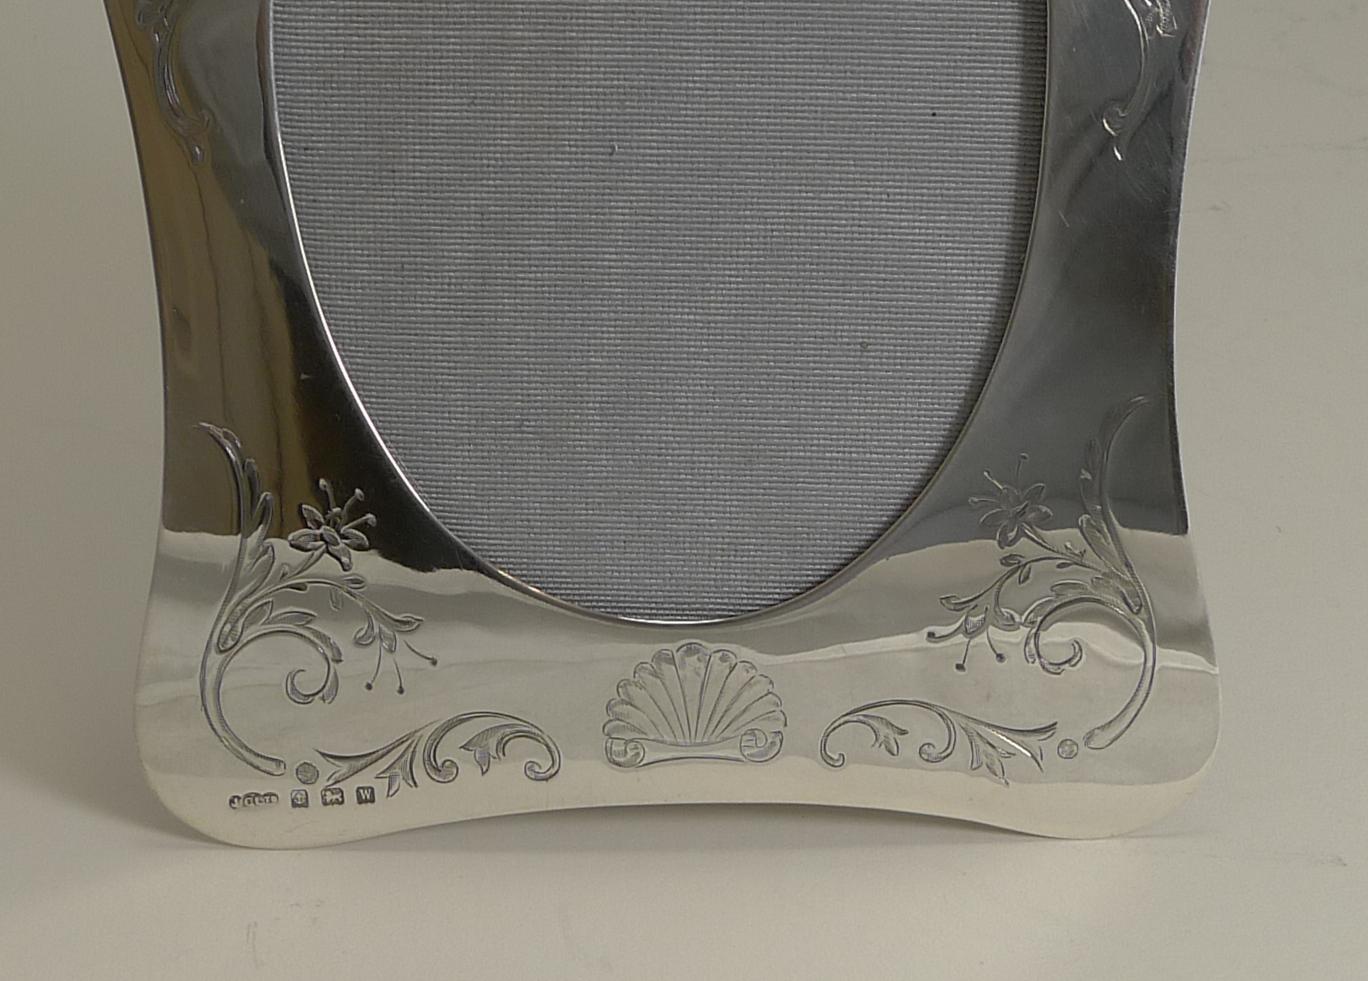 A stunning shaped photograph frame made from solid English sterling silver fully hallmarked for Birmingham 1921, 98 years old. The makers initials are also present for Joseph Gloster Ltd.

The frame is decorated with top quality engraving